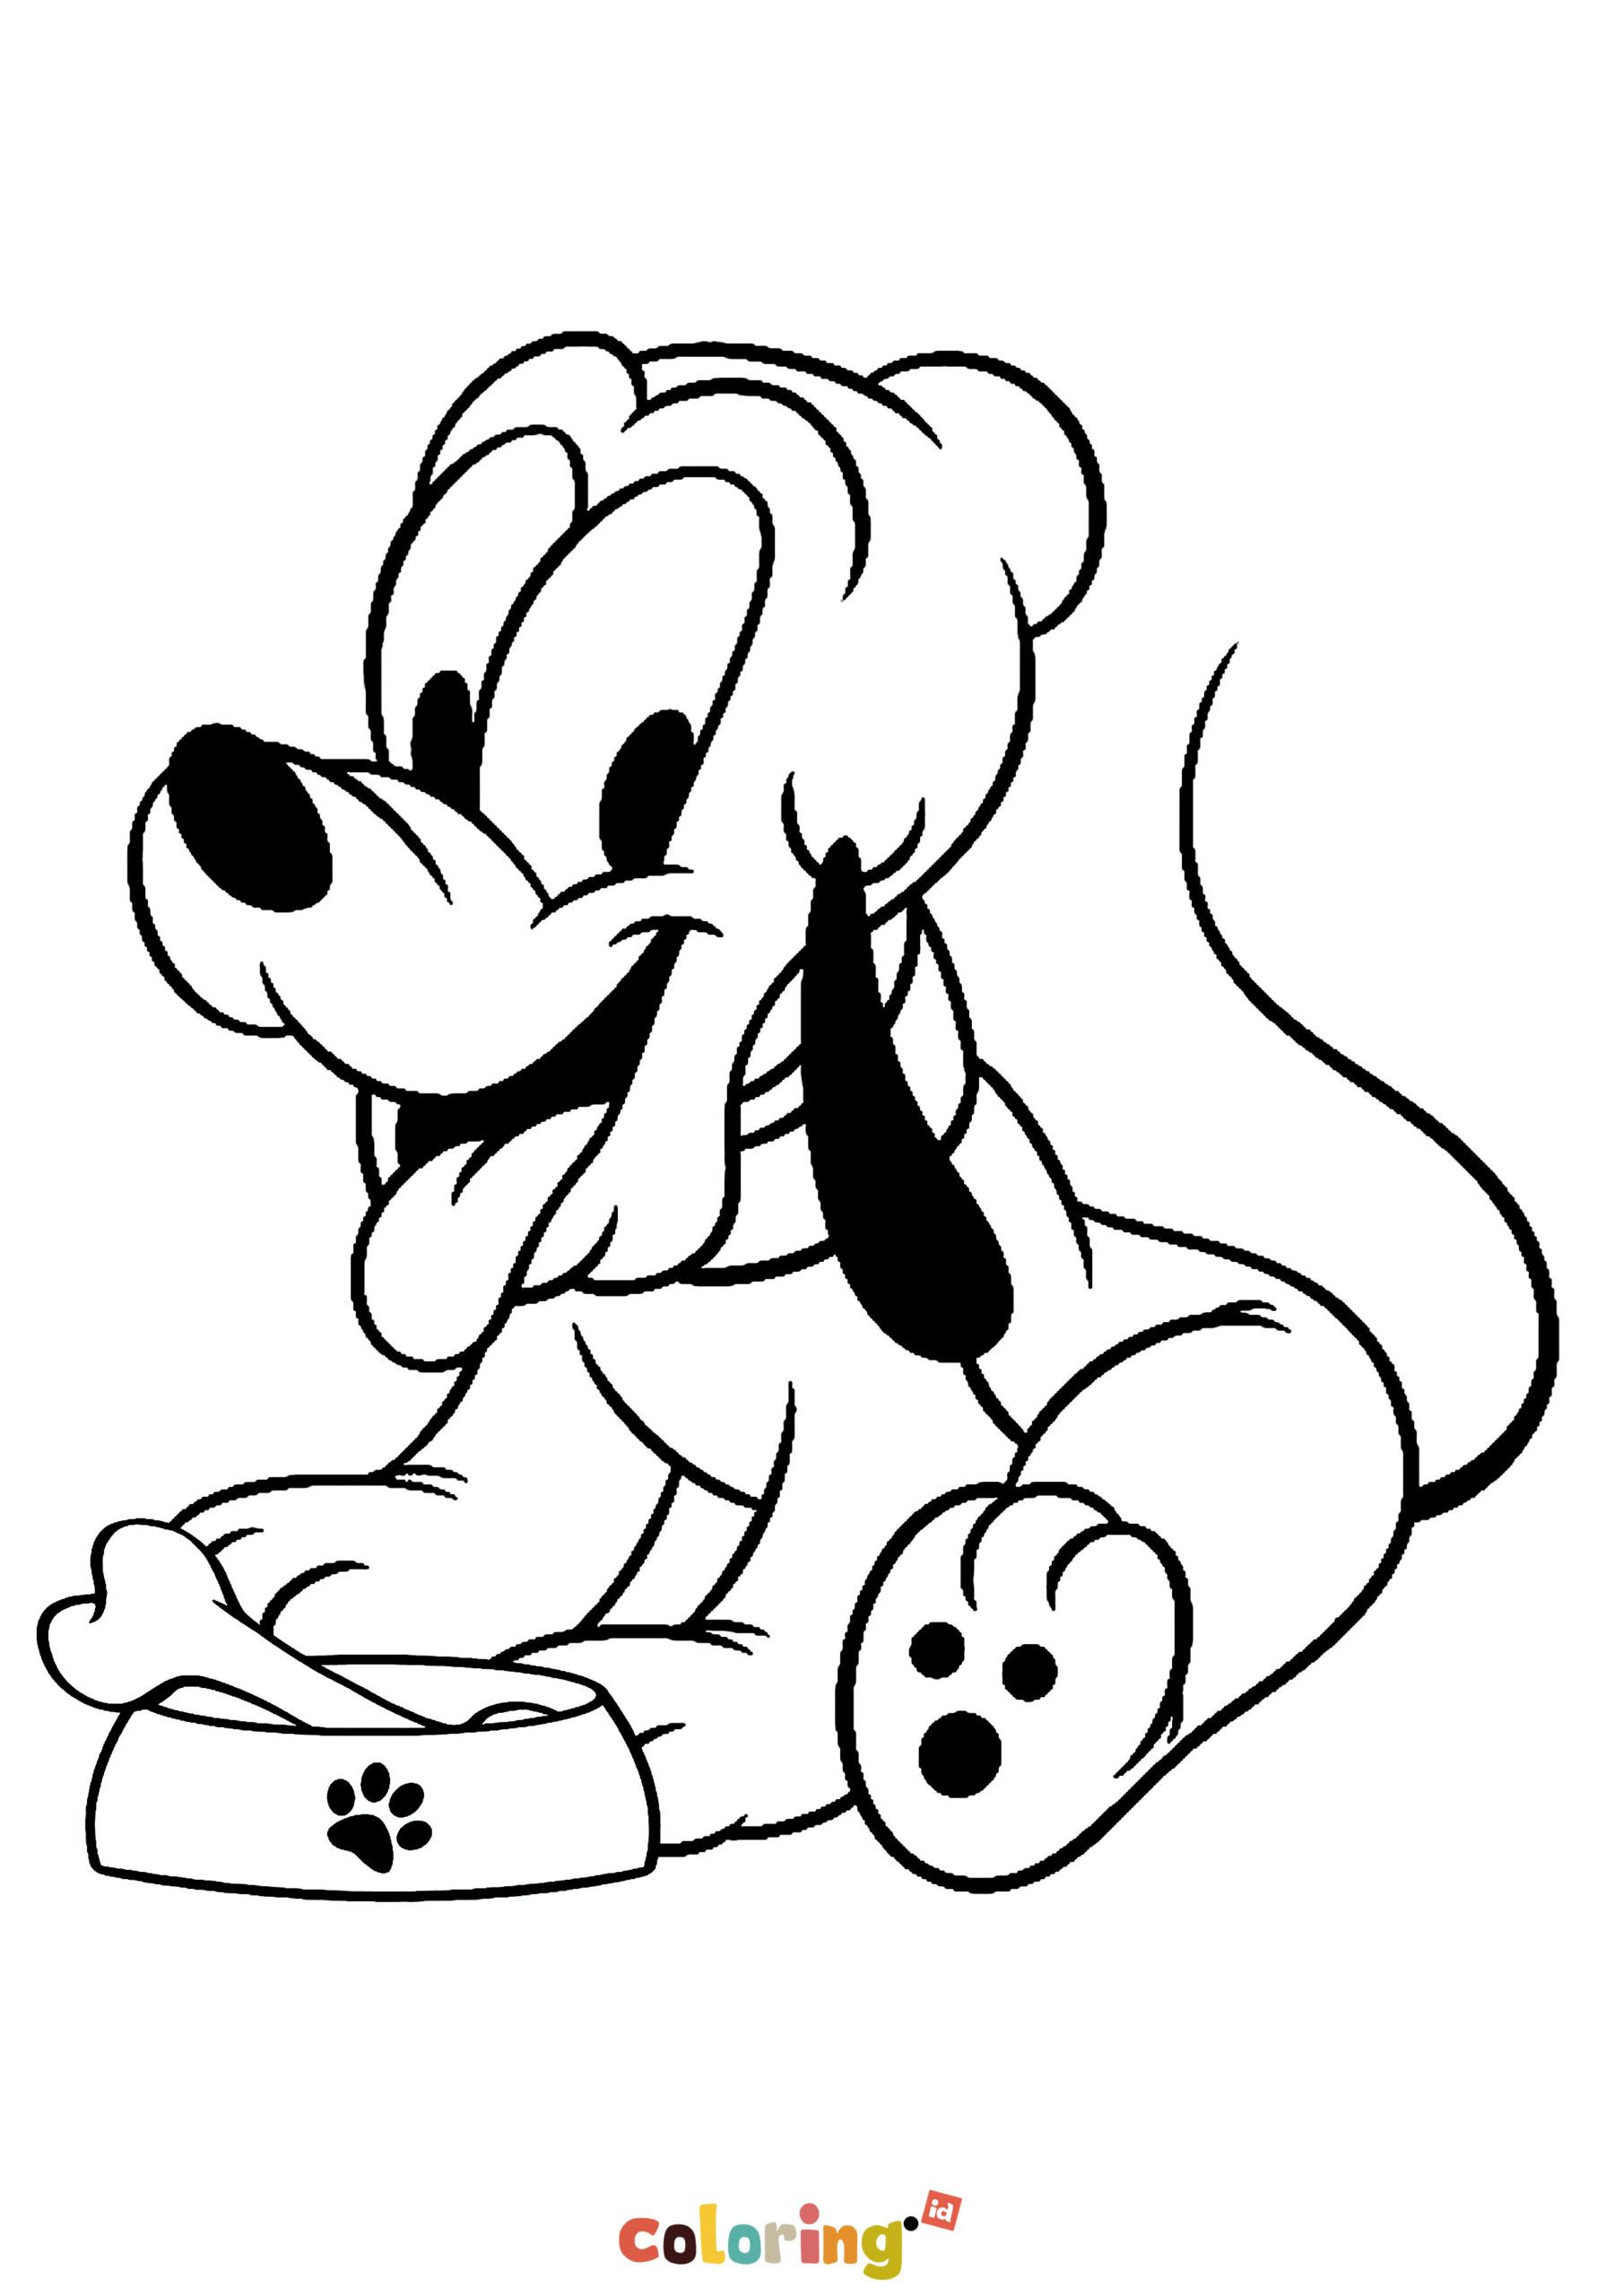 Disney Characters Coloring Pages